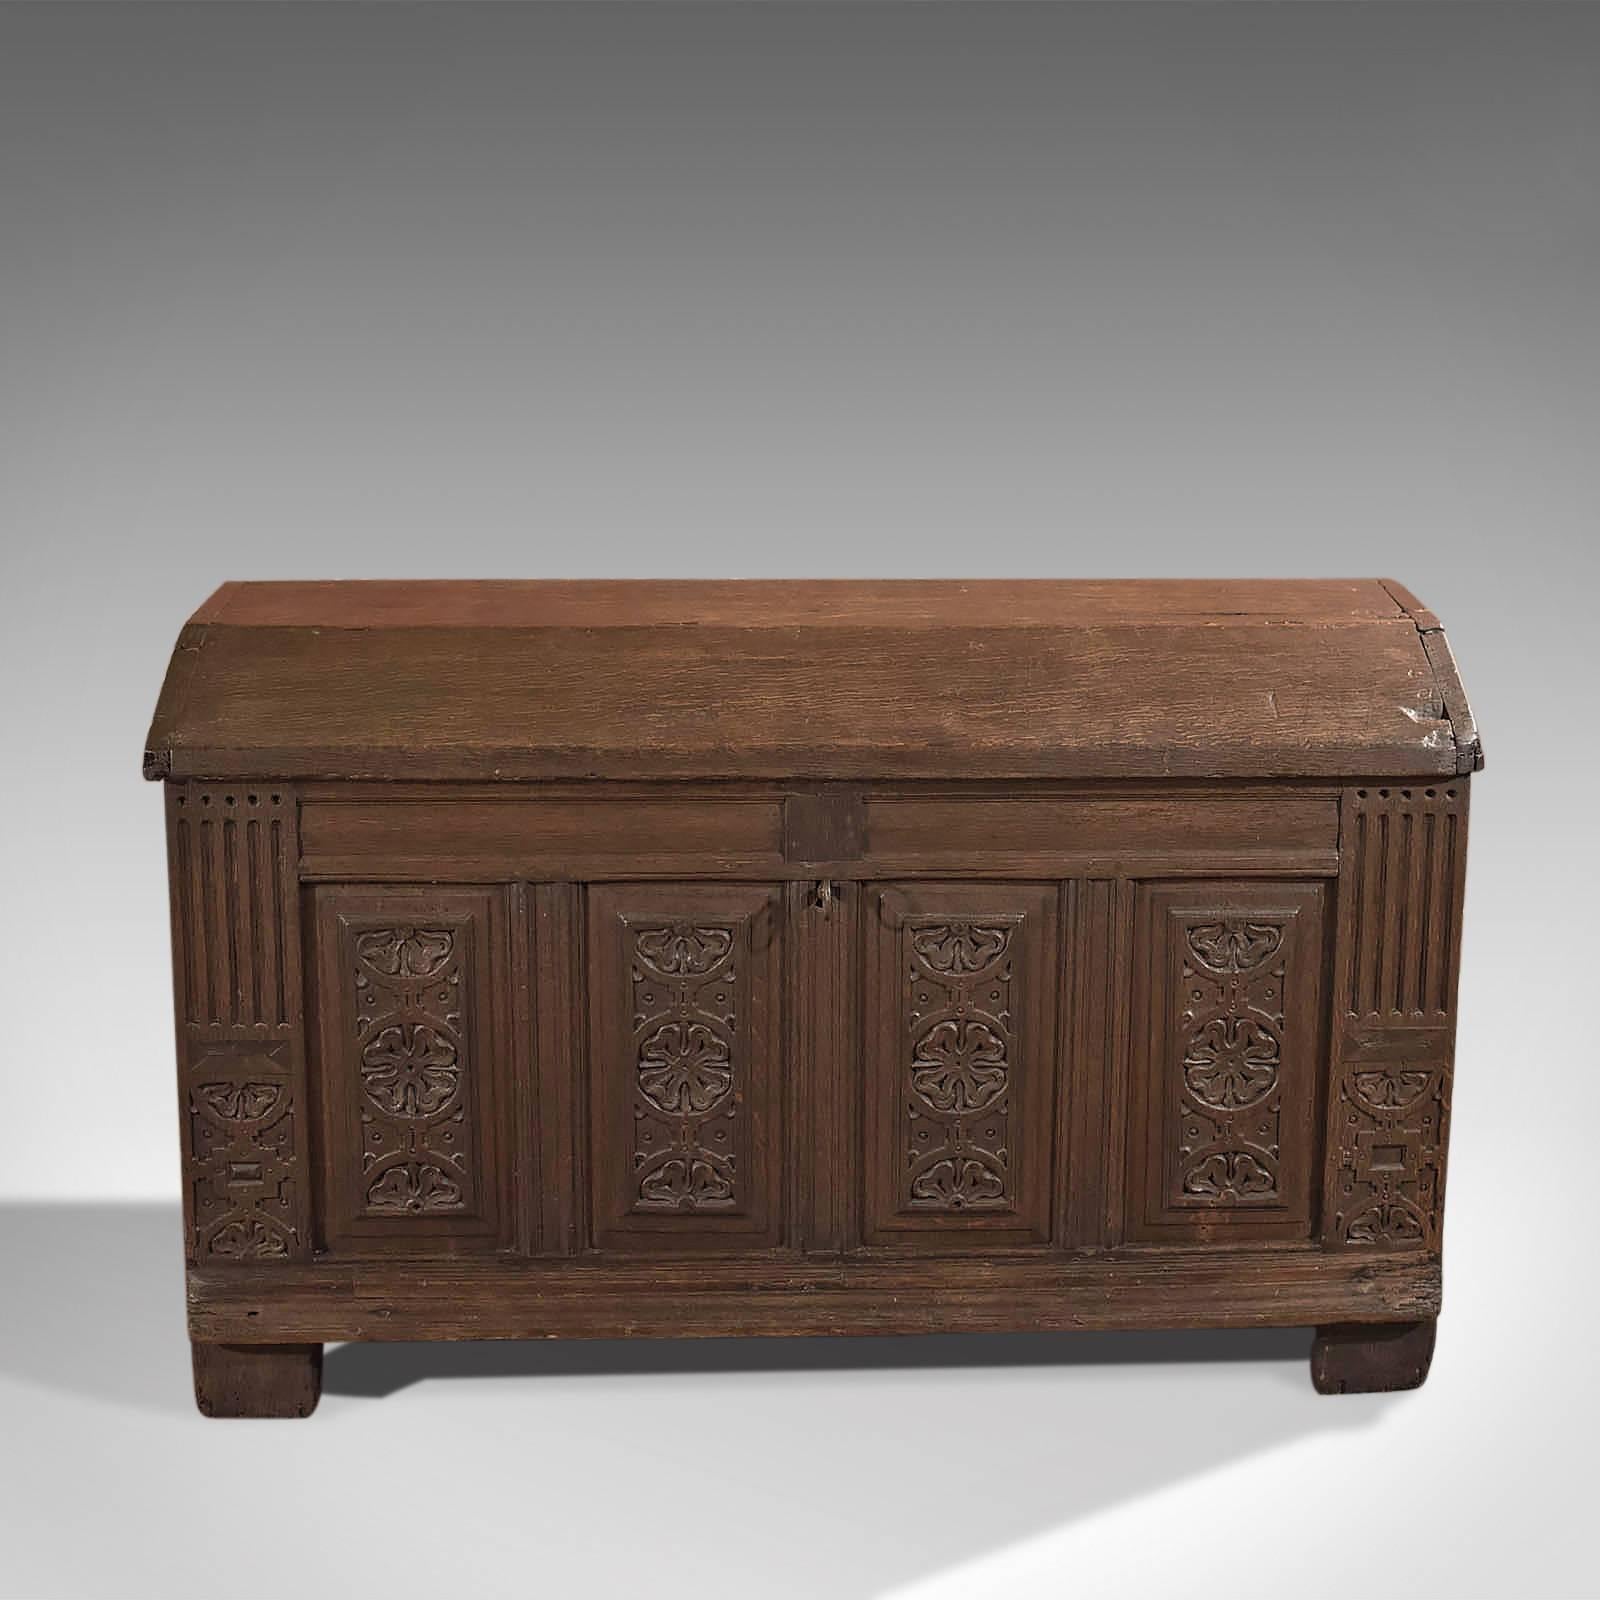 This is an antique chest dating to the late 17th century.

Raised on the extended stiles, this chest is of panelled construction held within robust 40 mm thick, oak stock displaying carved detail to the front; the four panels featuring stylised